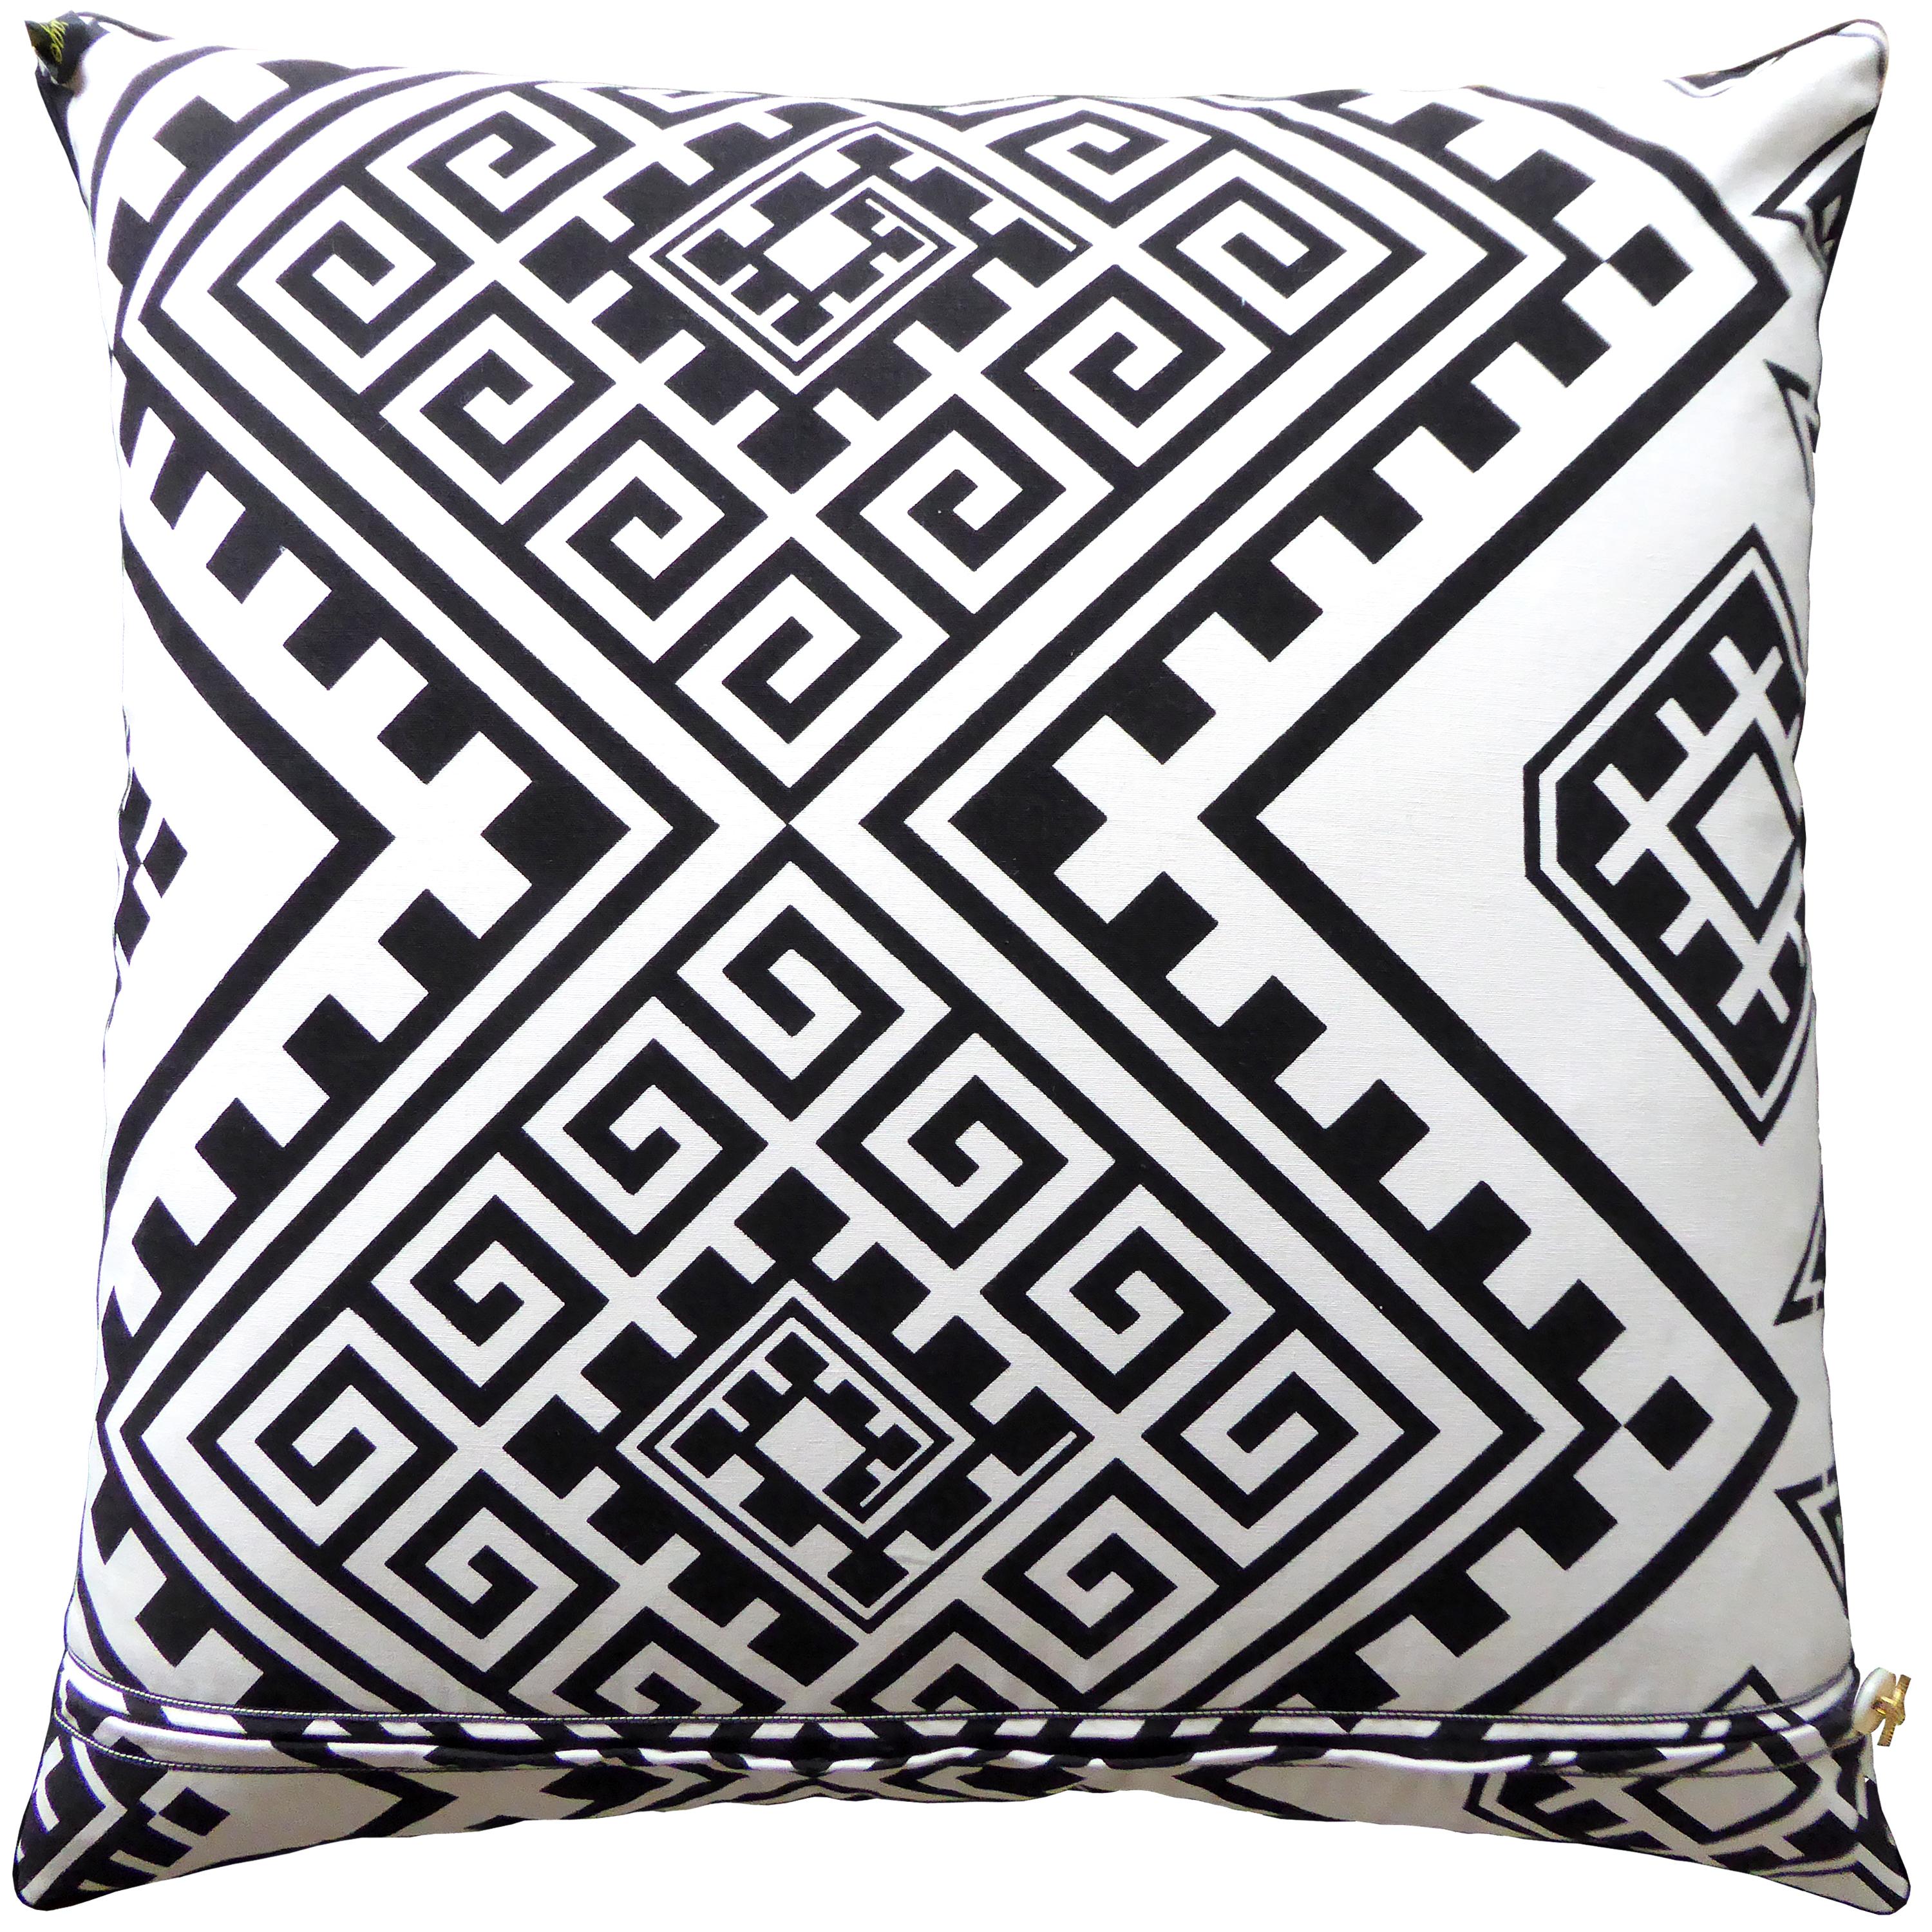 Optical Art,
circa 1960
British made bespoke luxury cushion created by using original vintage fabrics; A typical design manufactured during the ‘Op Art’ movement of the 1960s, a trend that is currently experiencing a revival
Provenance: Britain
Made